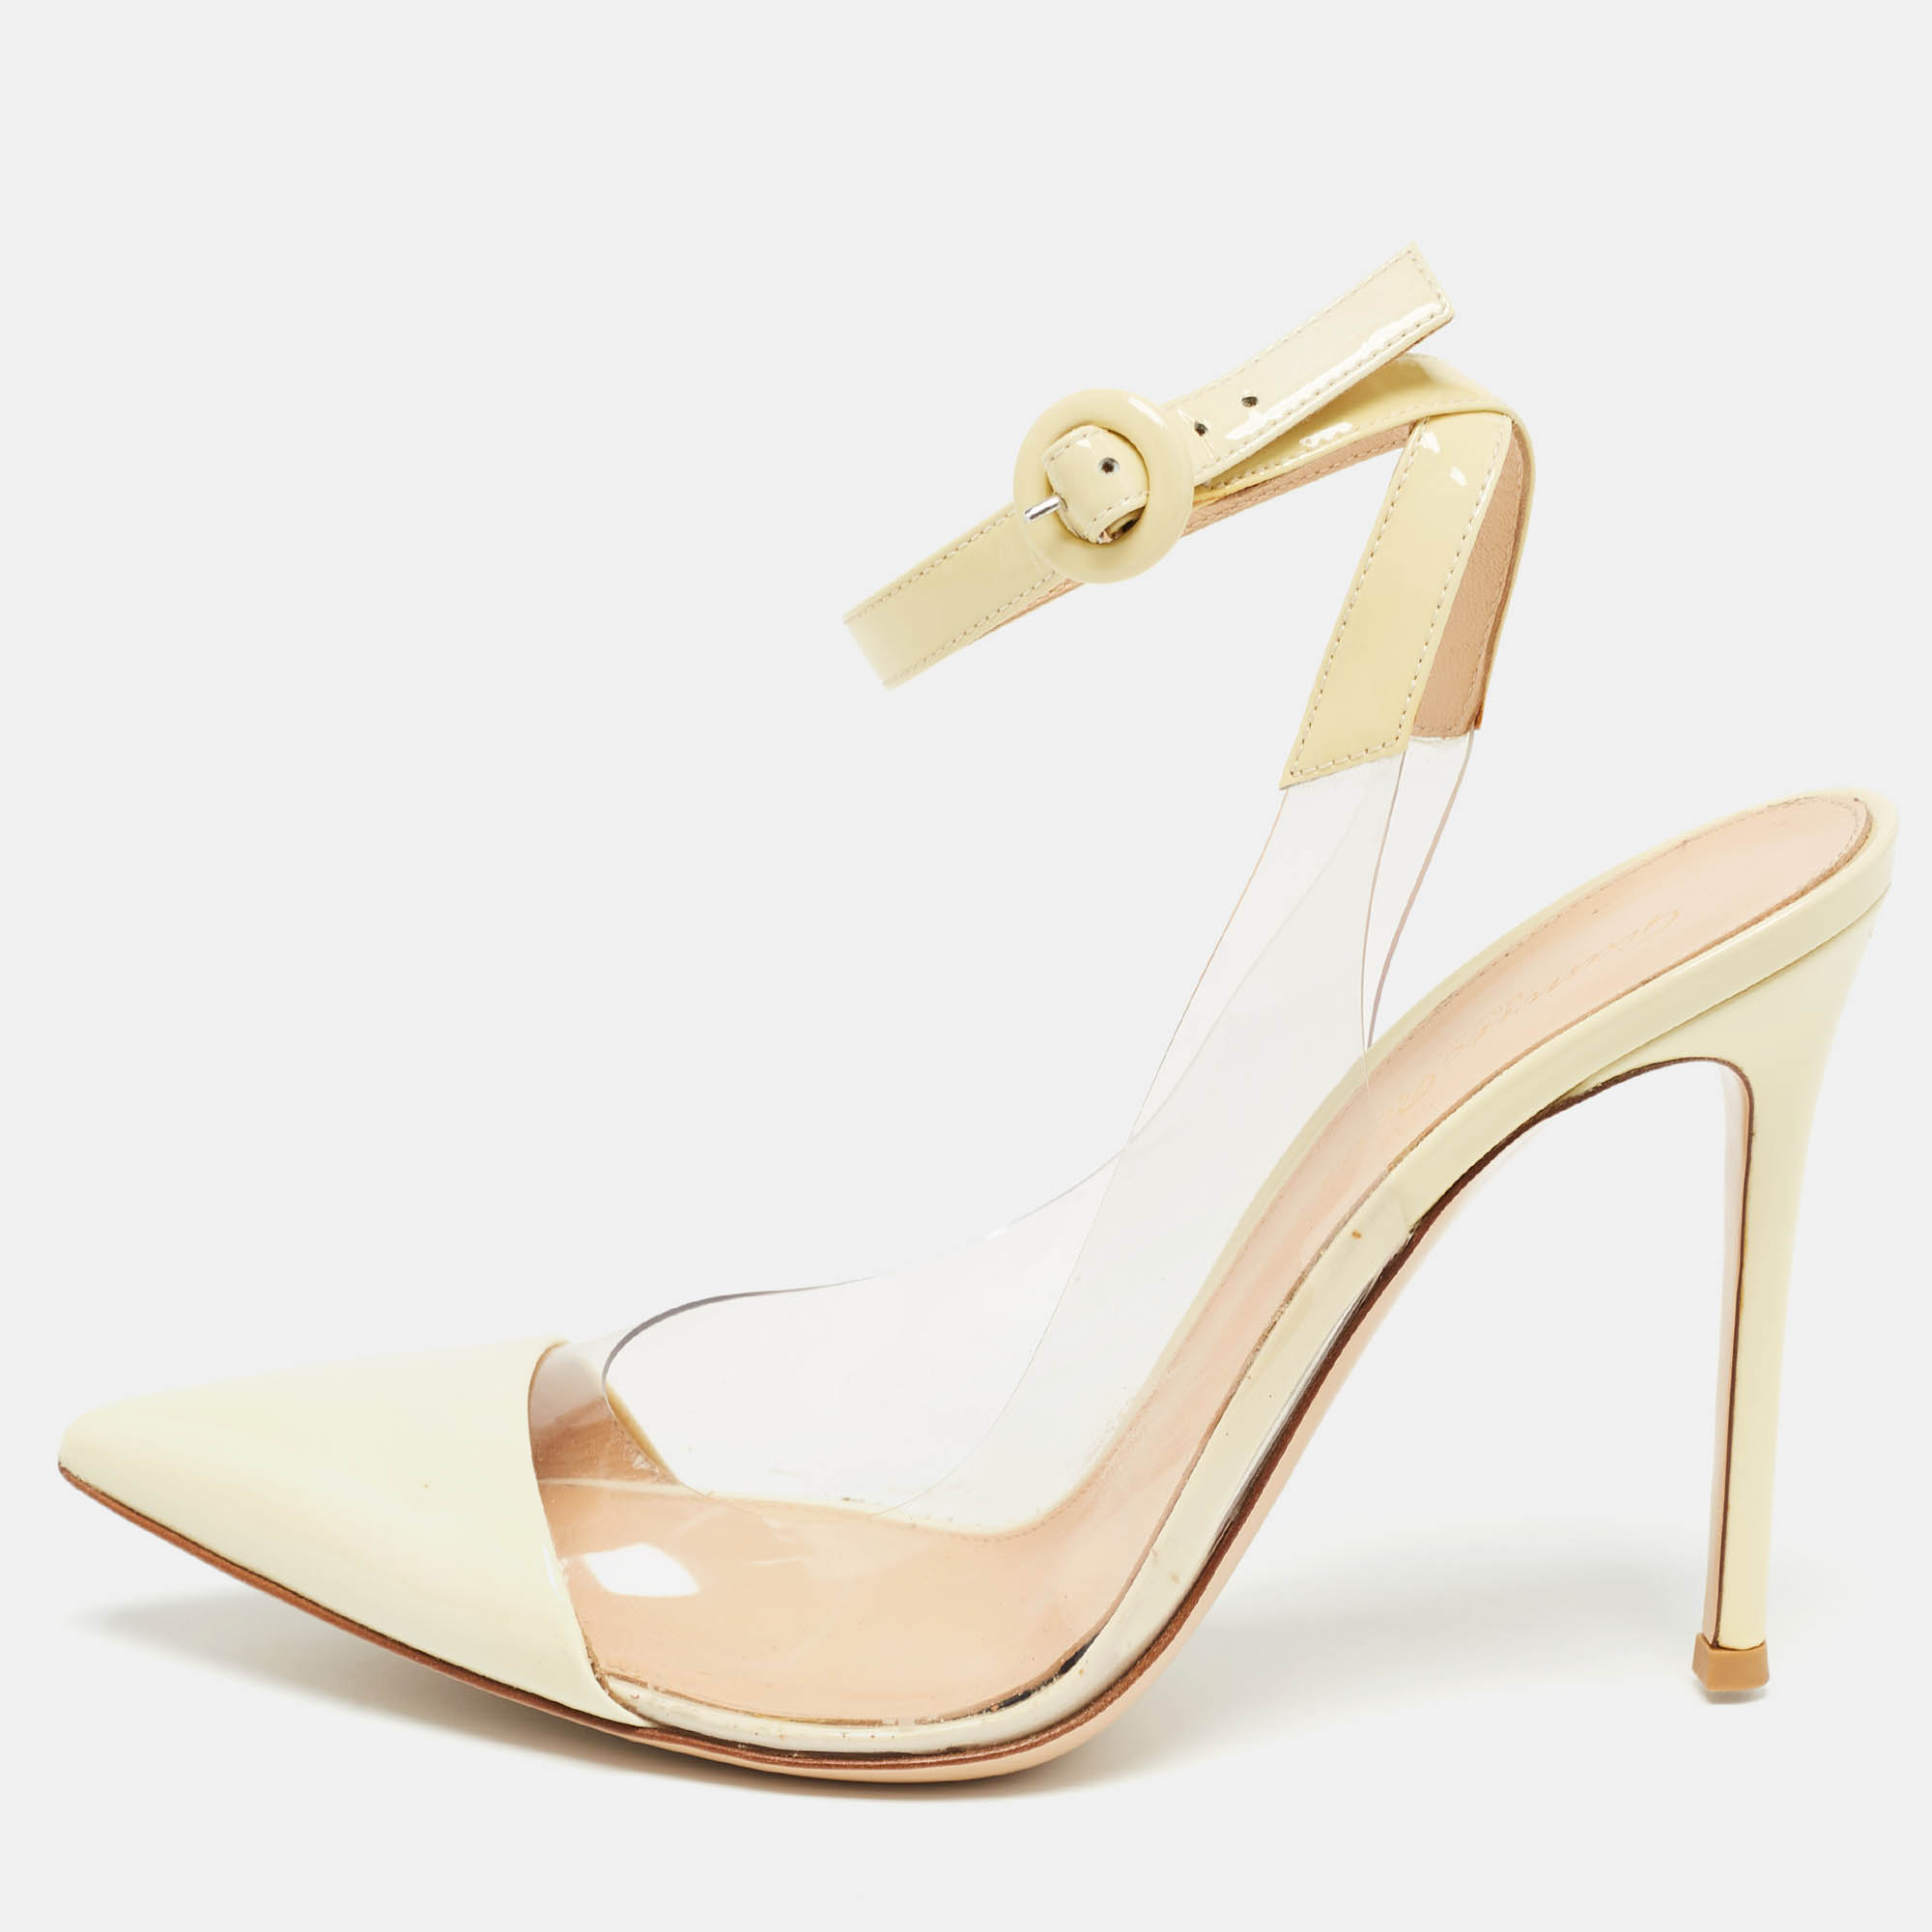 Pre-owned Gianvito Rossi Cream Patent And Pvc Slingback Pumps Size 39.5